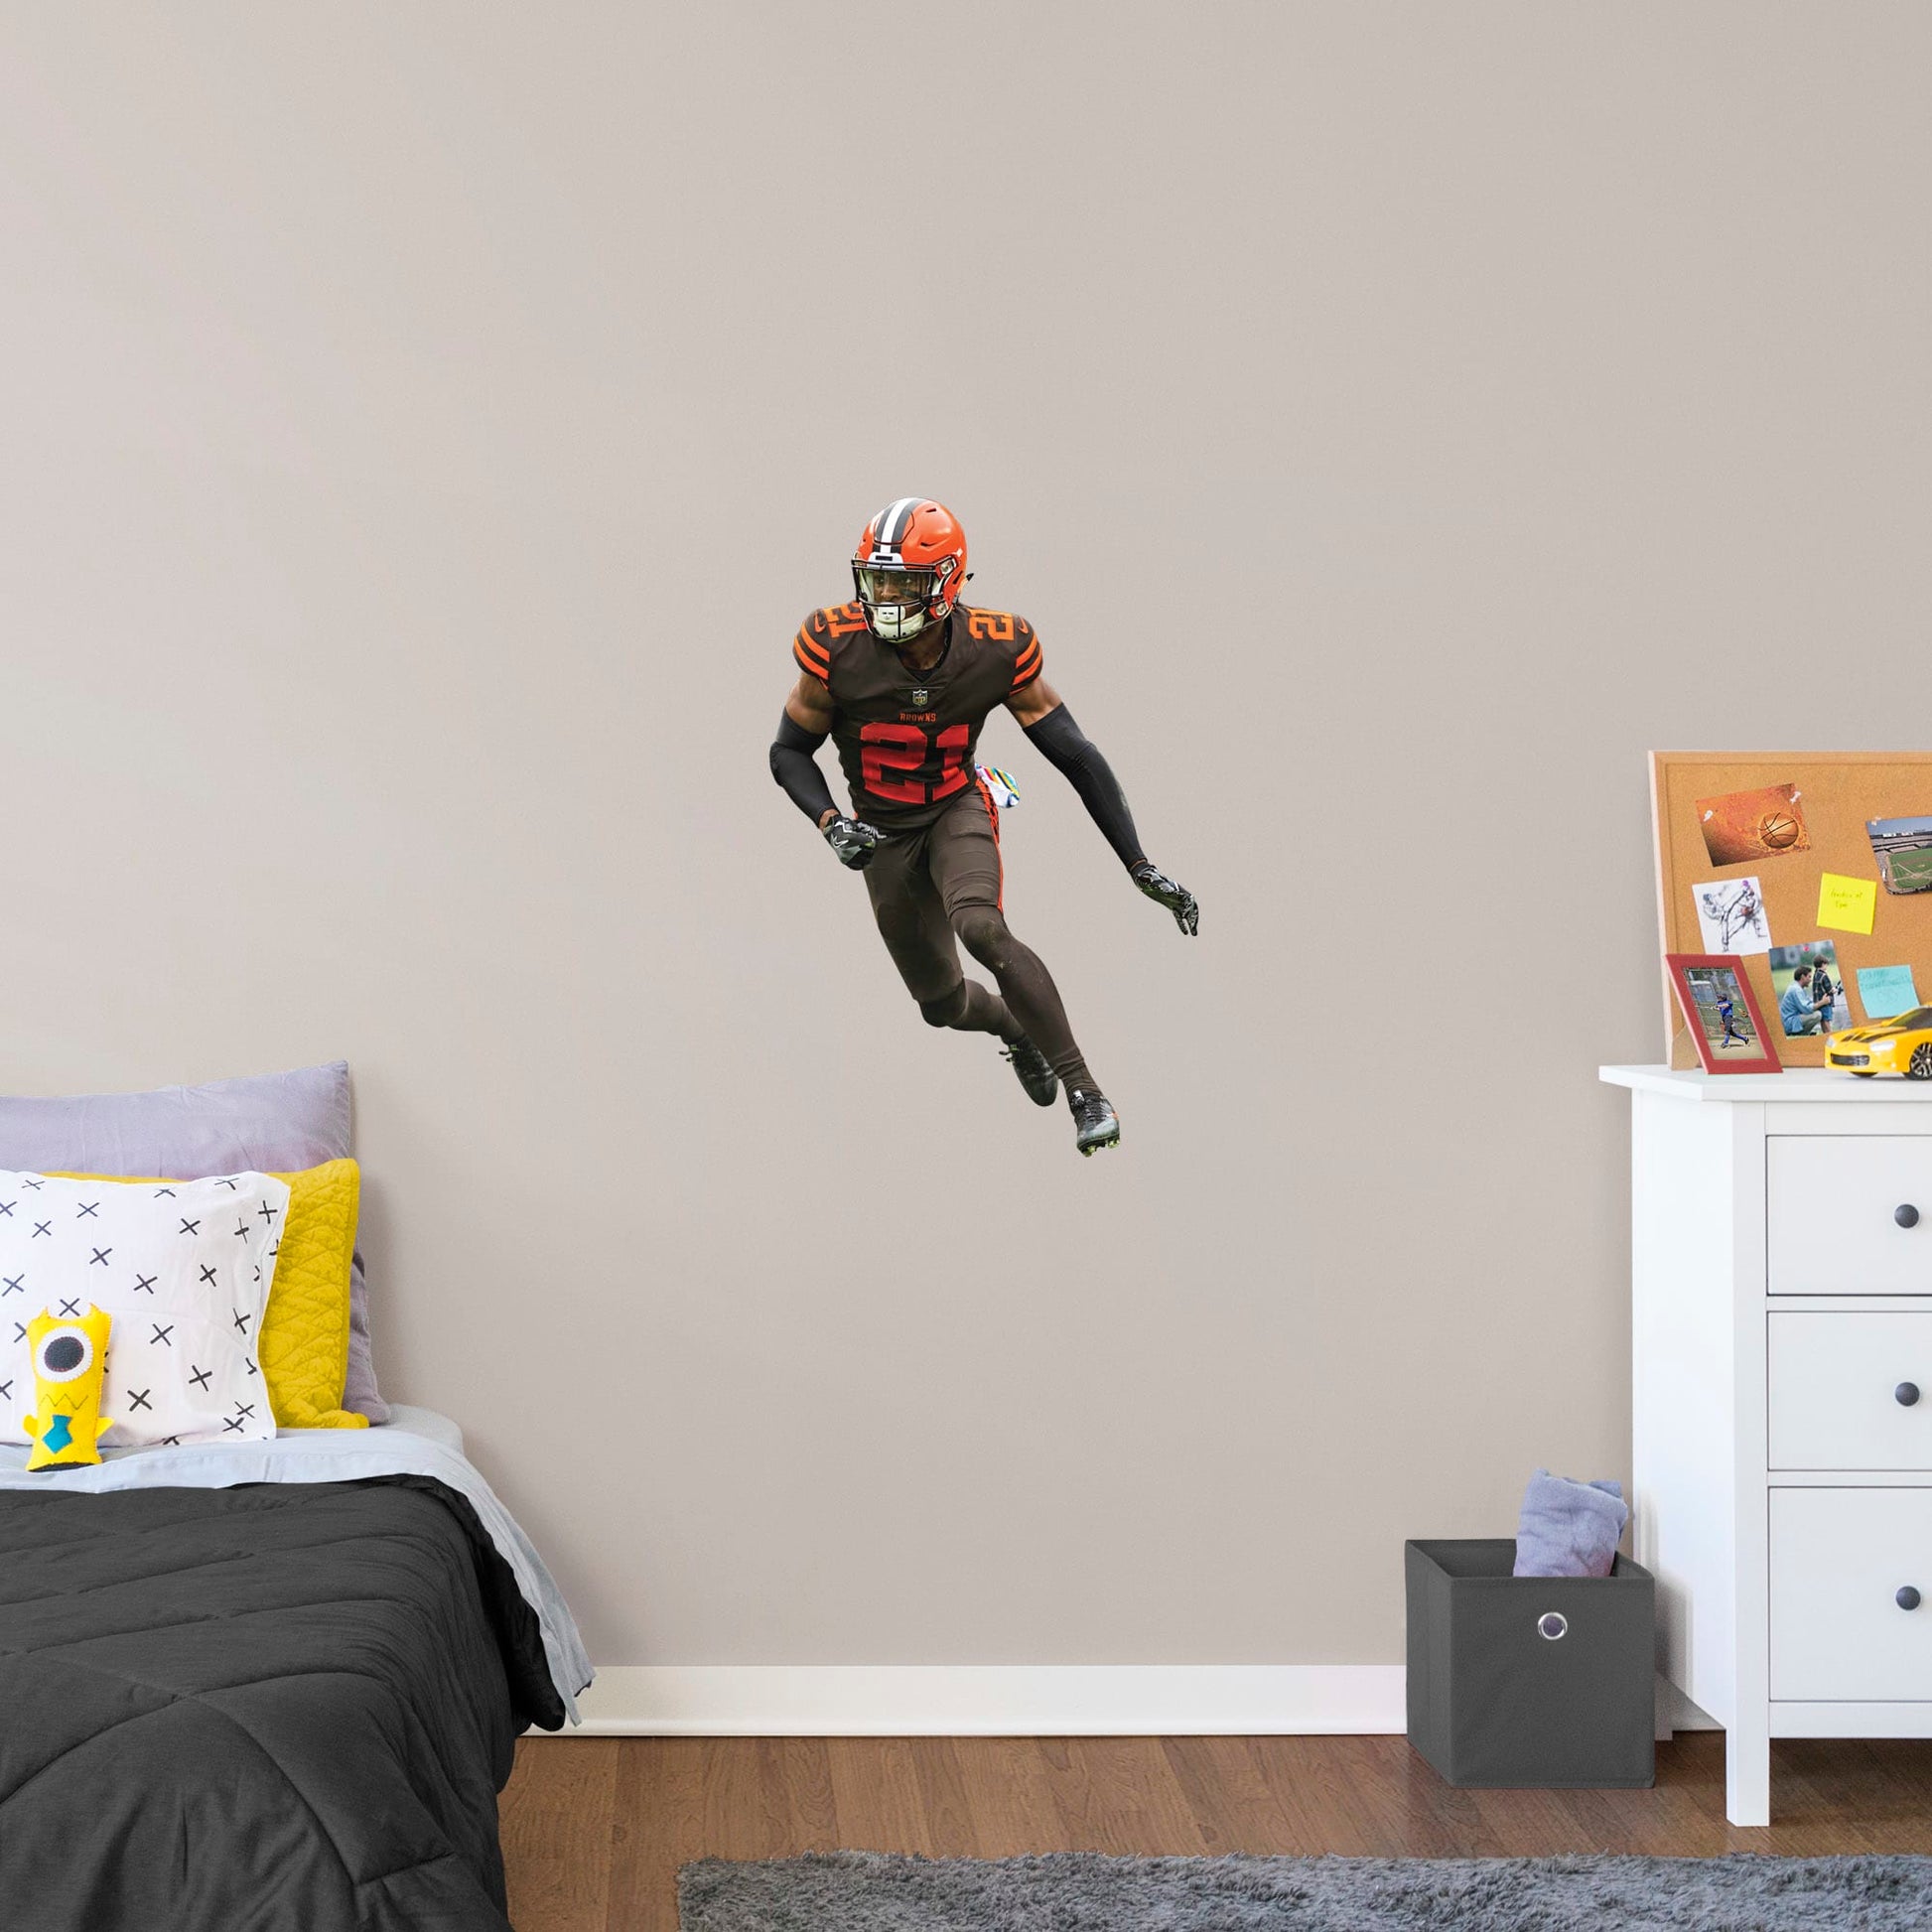 X-Large Athlete + 2 Decals (25"W x 38"H) Bring the action of the NFL into your home with a wall decal of Denzel Ward! High quality, durable, and tear resistant, you'll be able to stick and move it as many times as you want to create the ultimate football experience in any room!